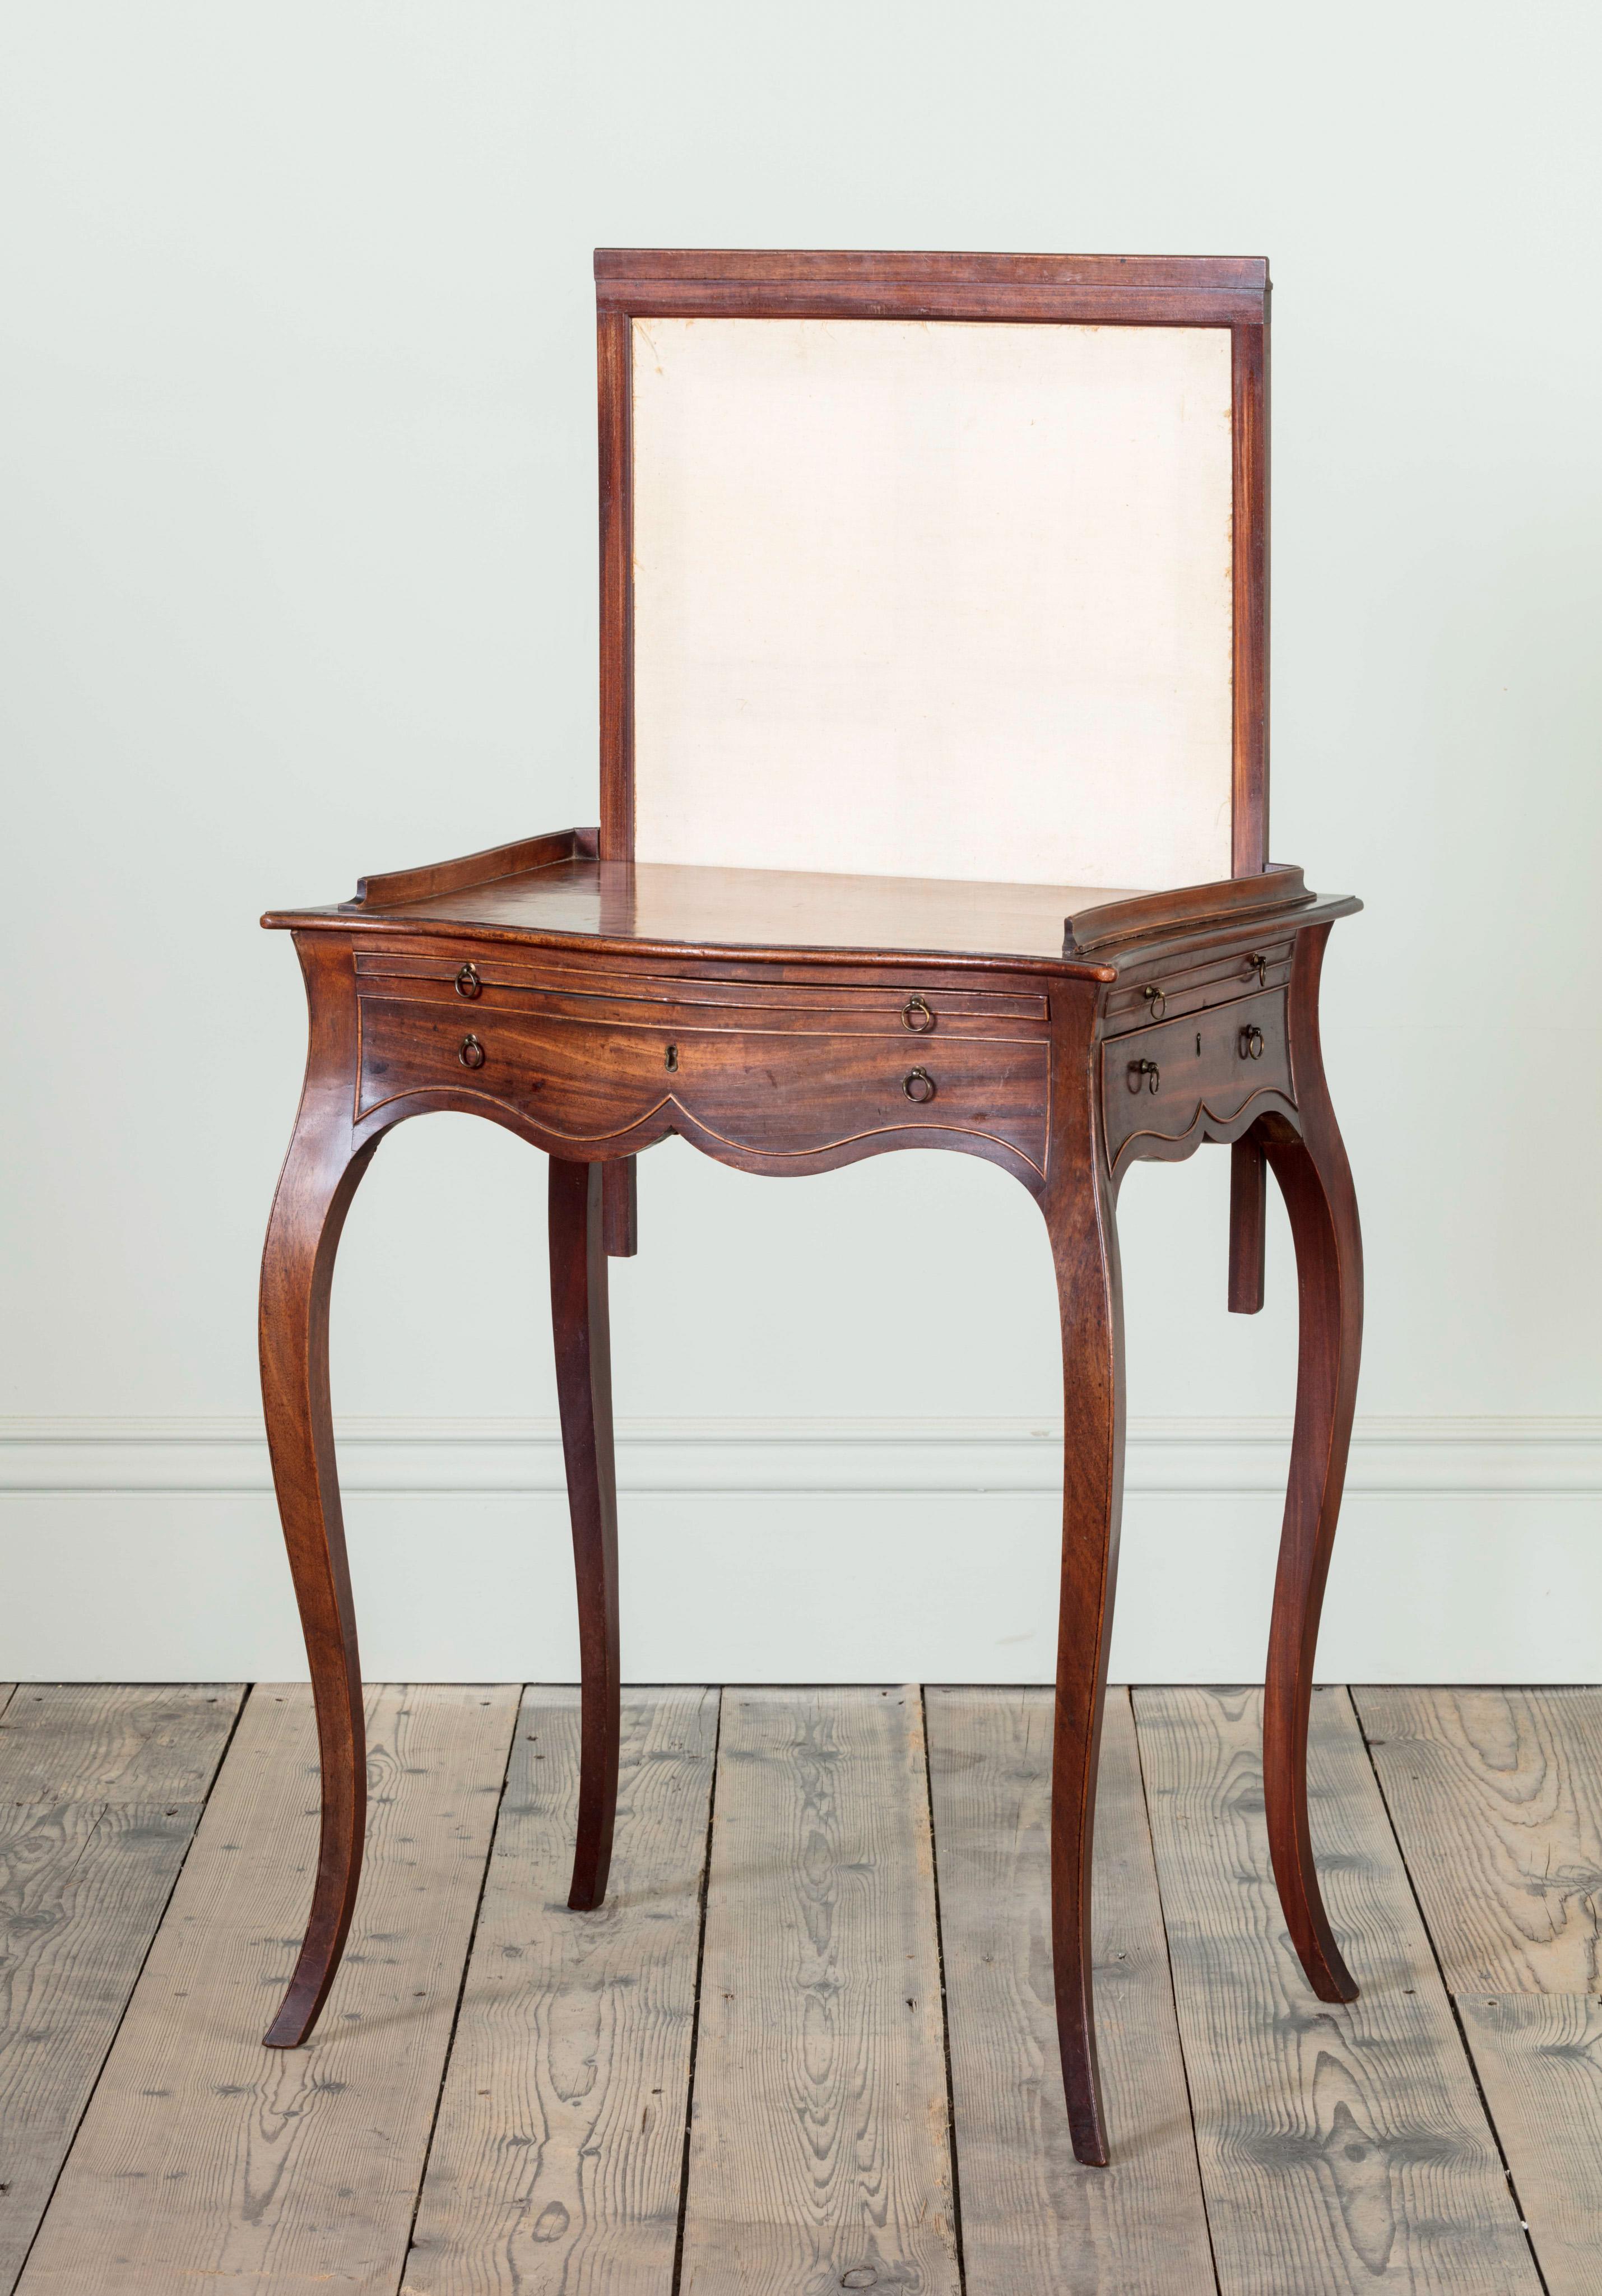 A George III figures mahogany ladies writing table, attributable to John Cobb with rising screen and concealed drawer on shaped slender cabriole legs, English, circa 1770.